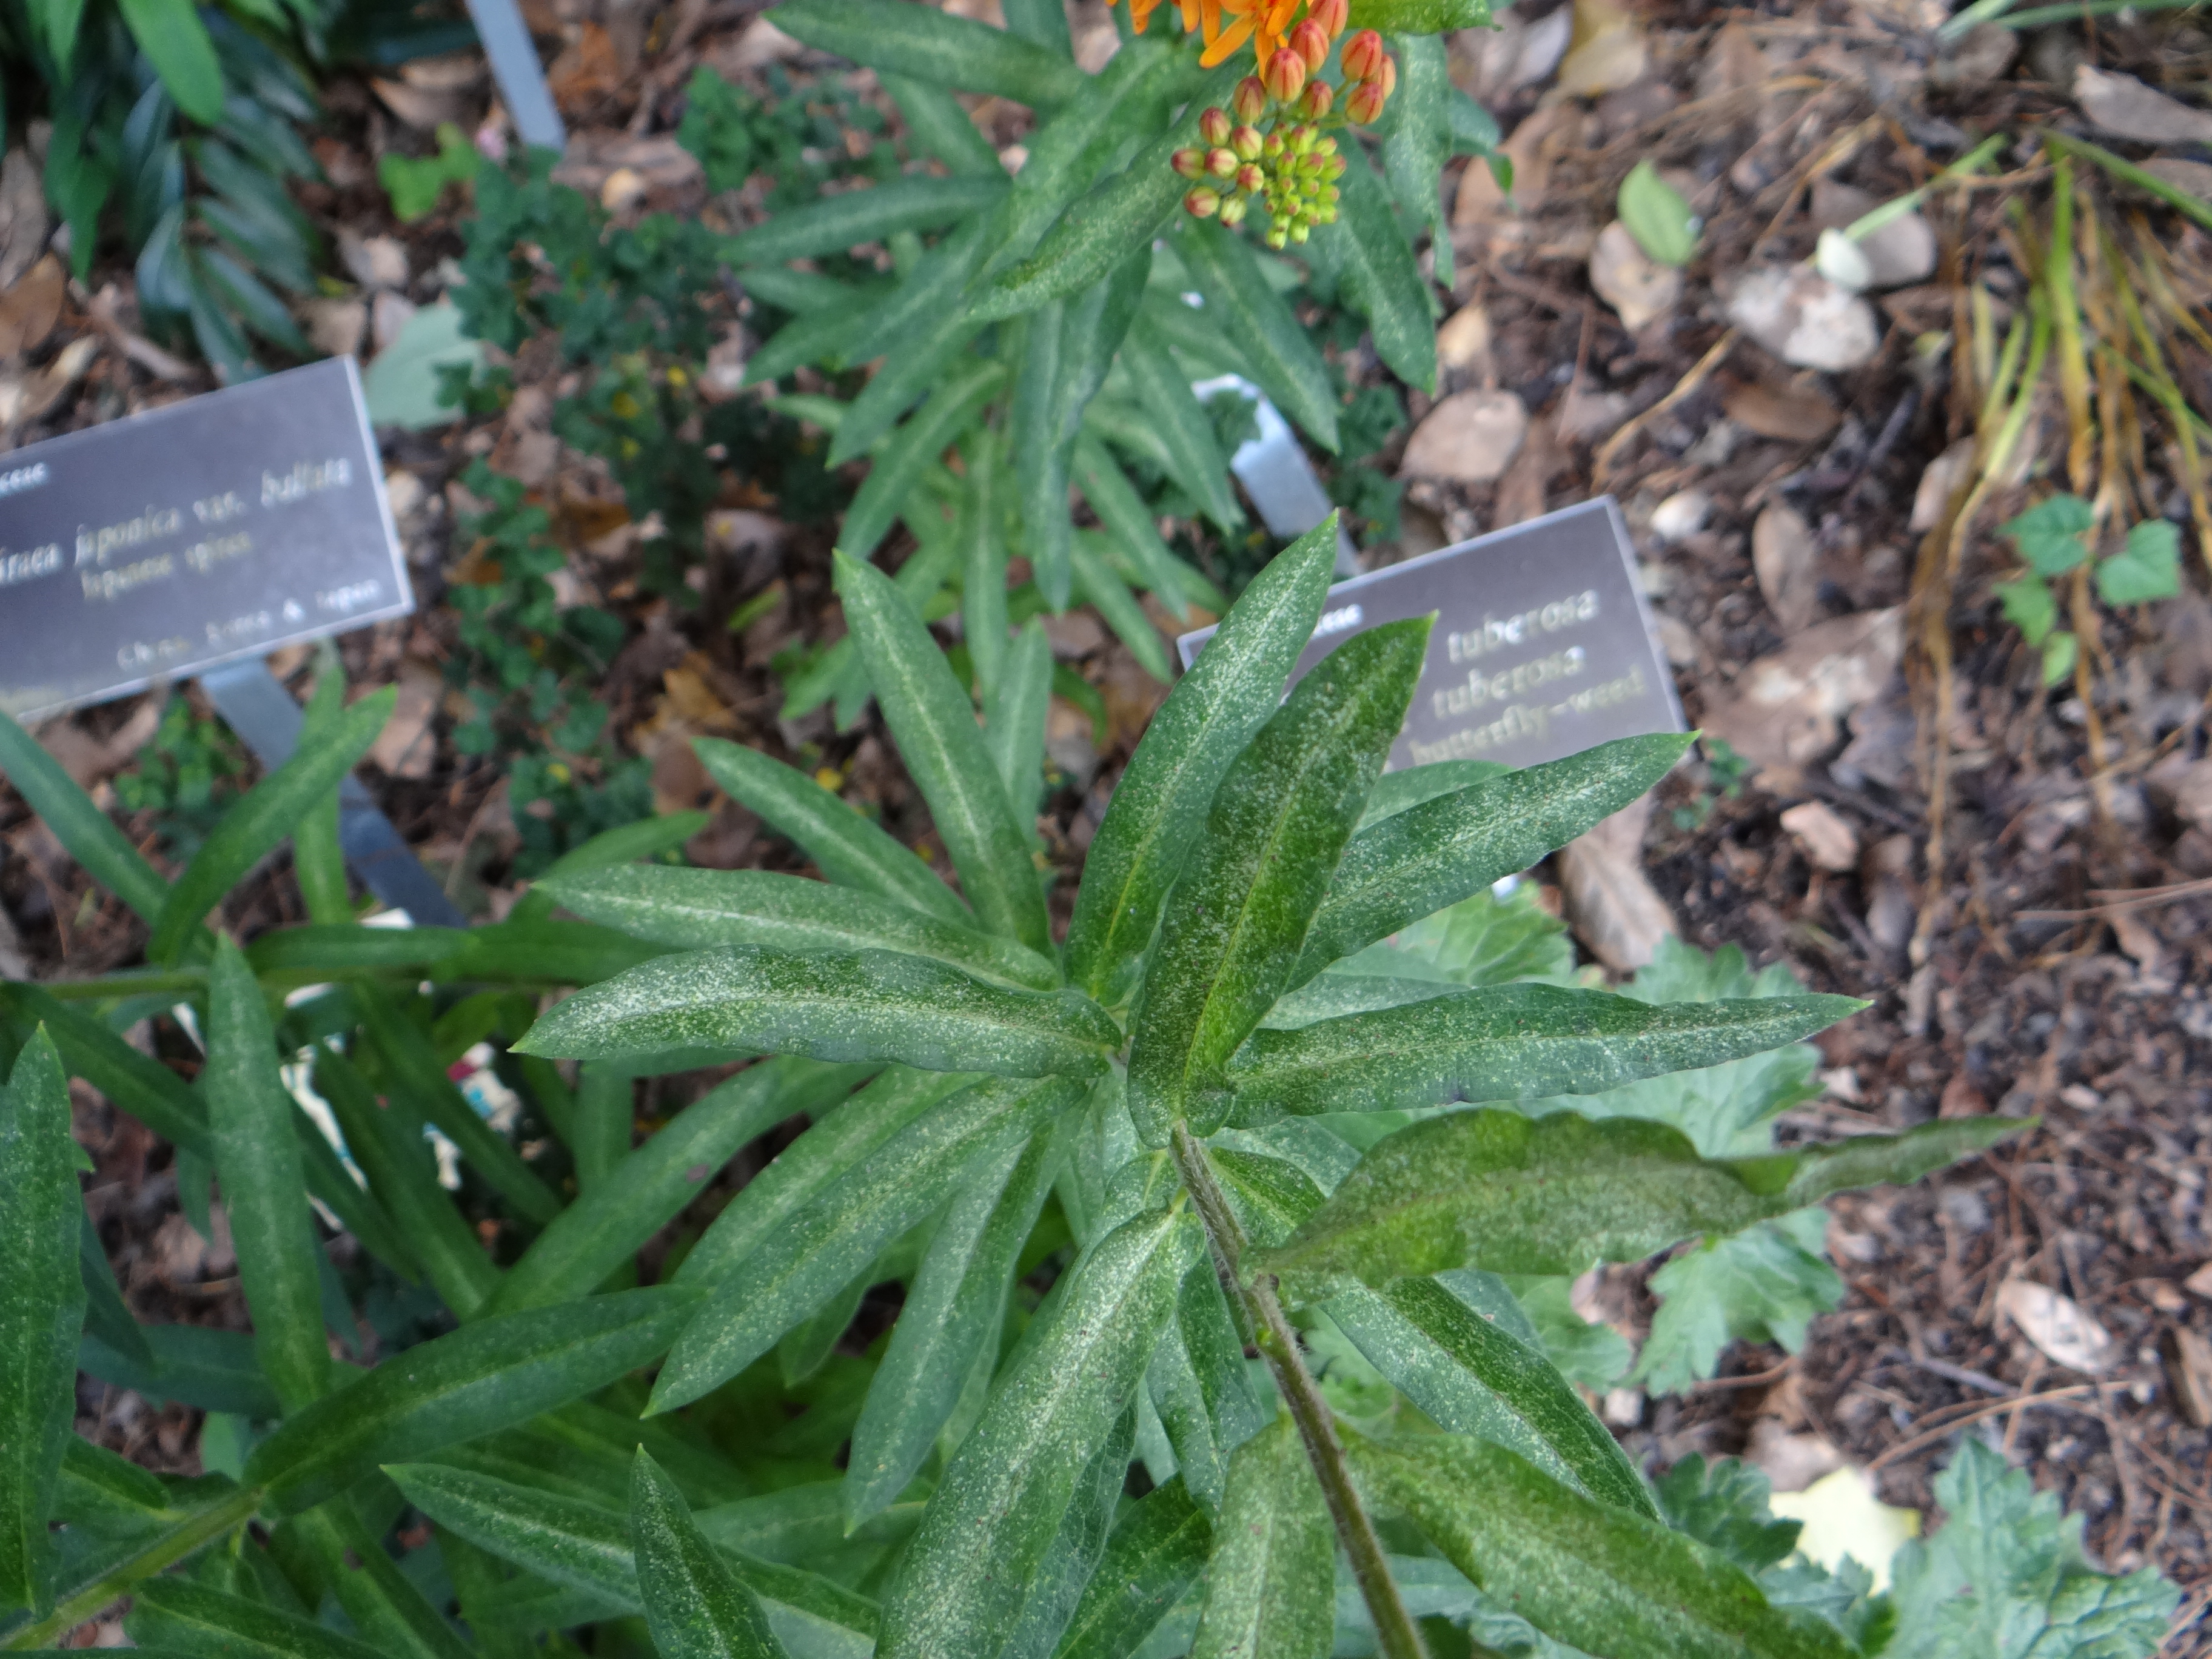 Twospotted spider mite damage on butterfly weed, Asclepias tuberosa. Photo: SD Frank